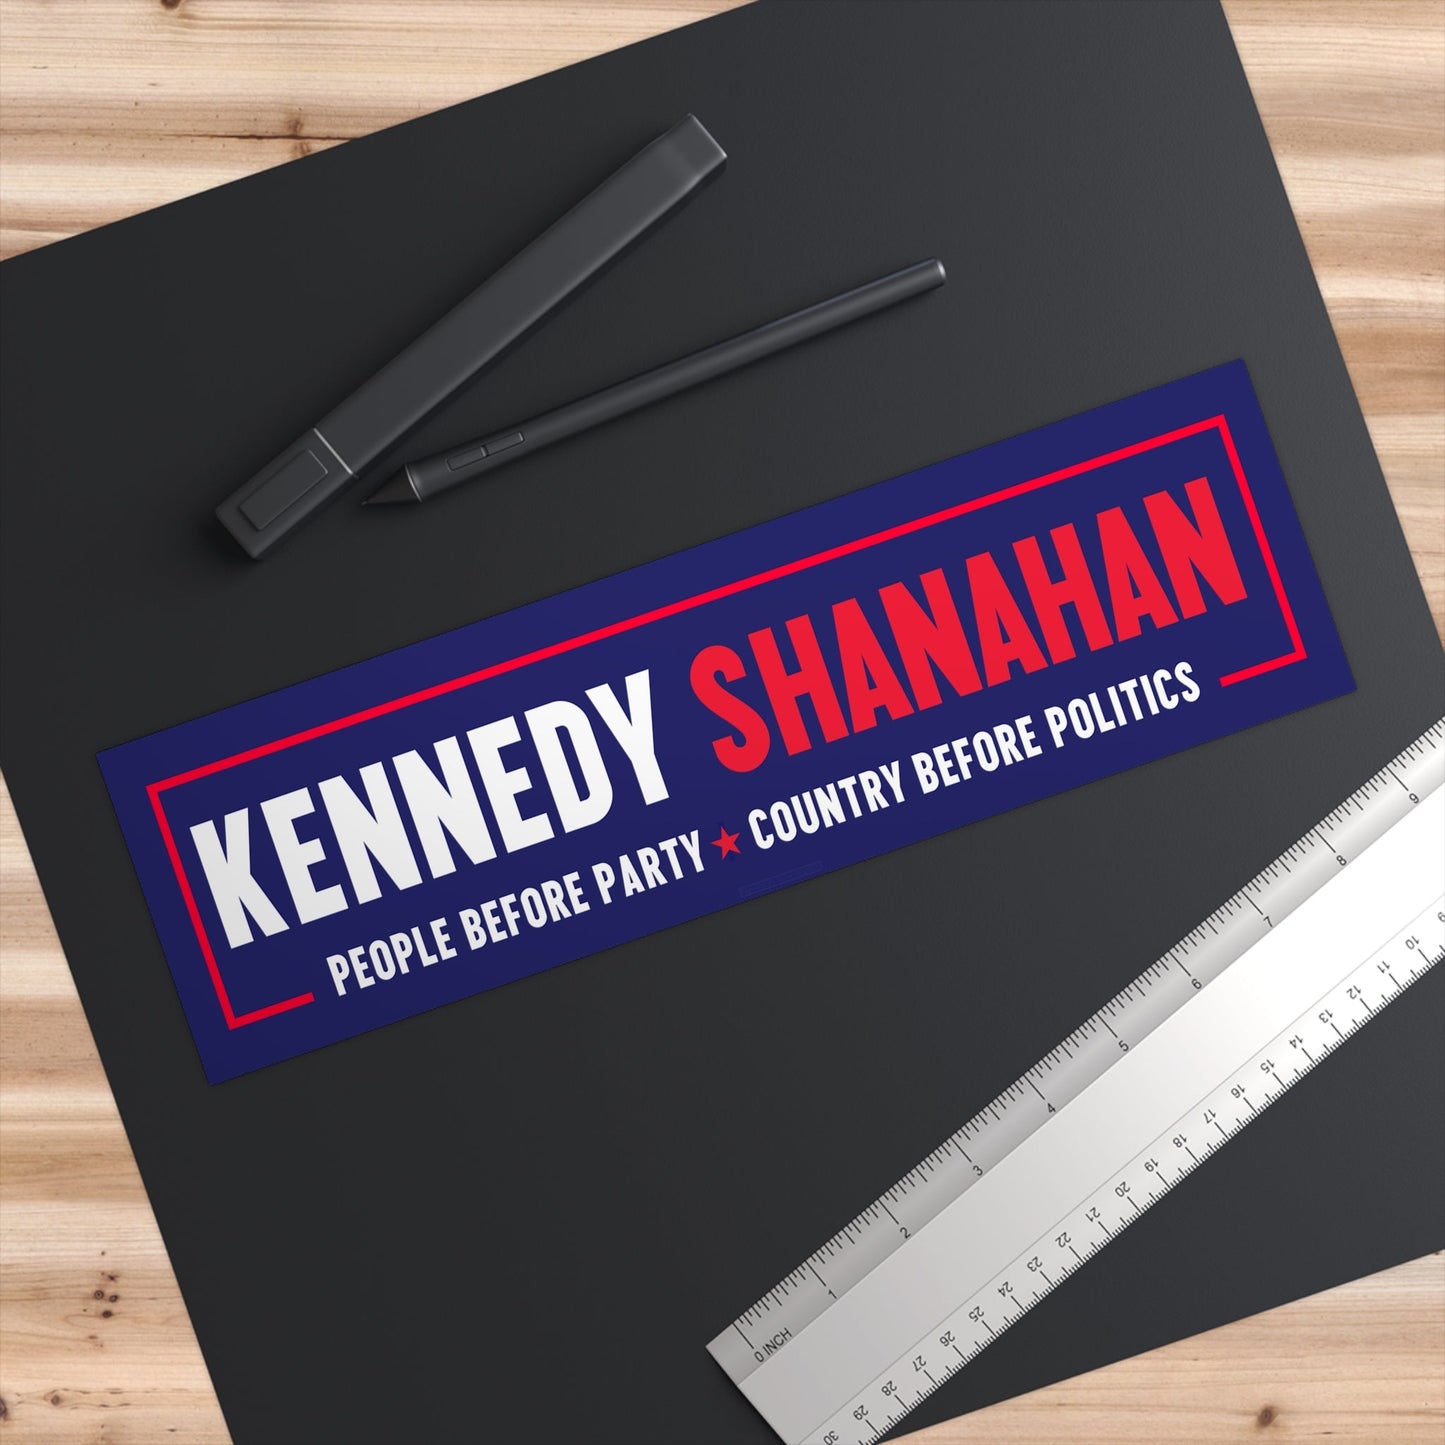 Kennedy Shanahan | People before Party, Country before Politics Bumper Sticker - Navy - TEAM KENNEDY. All rights reserved